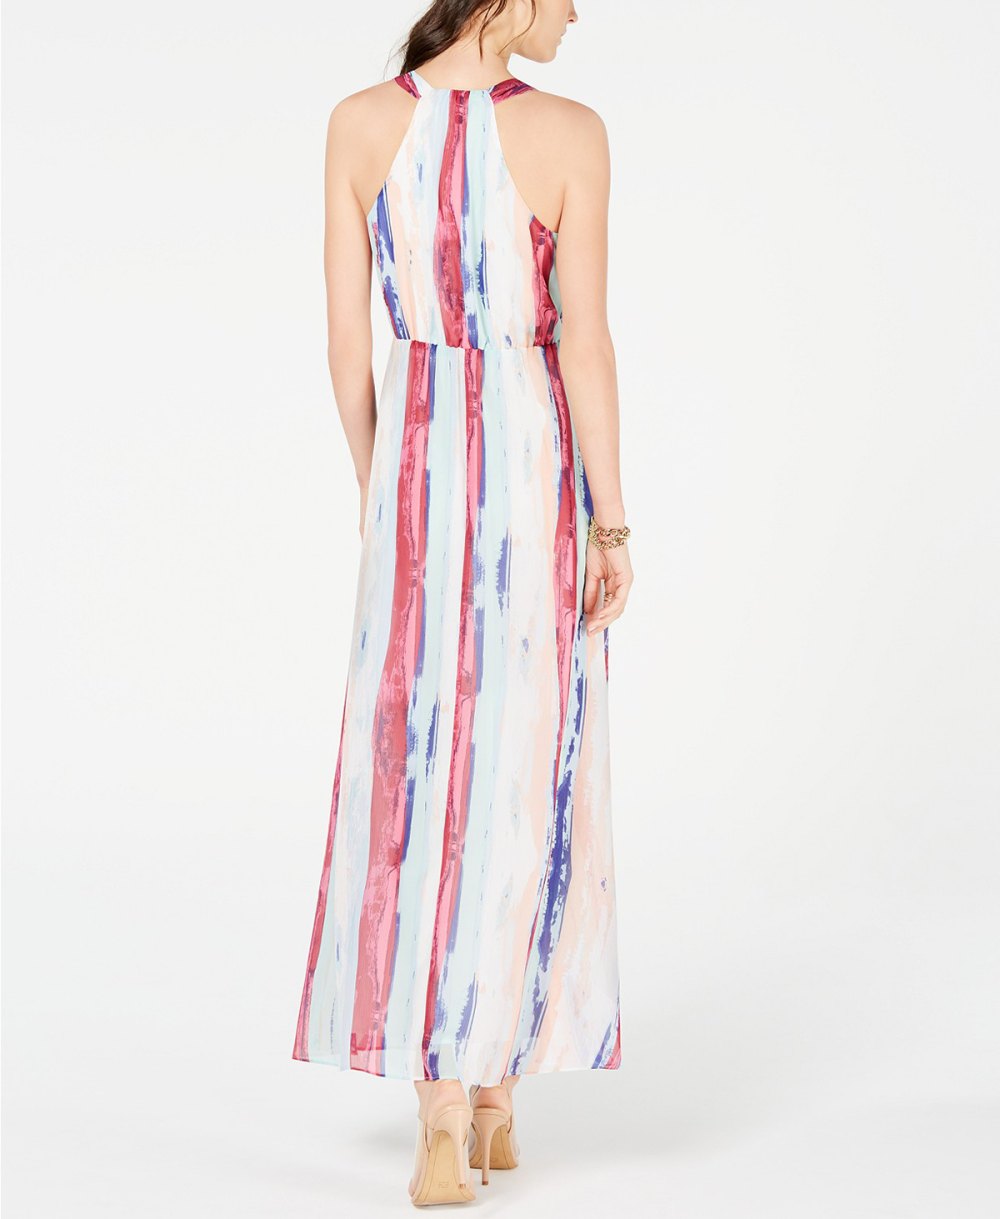 This Colorful Maxidress Is Our Favorite From Macy’s Dress Sale | Us Weekly